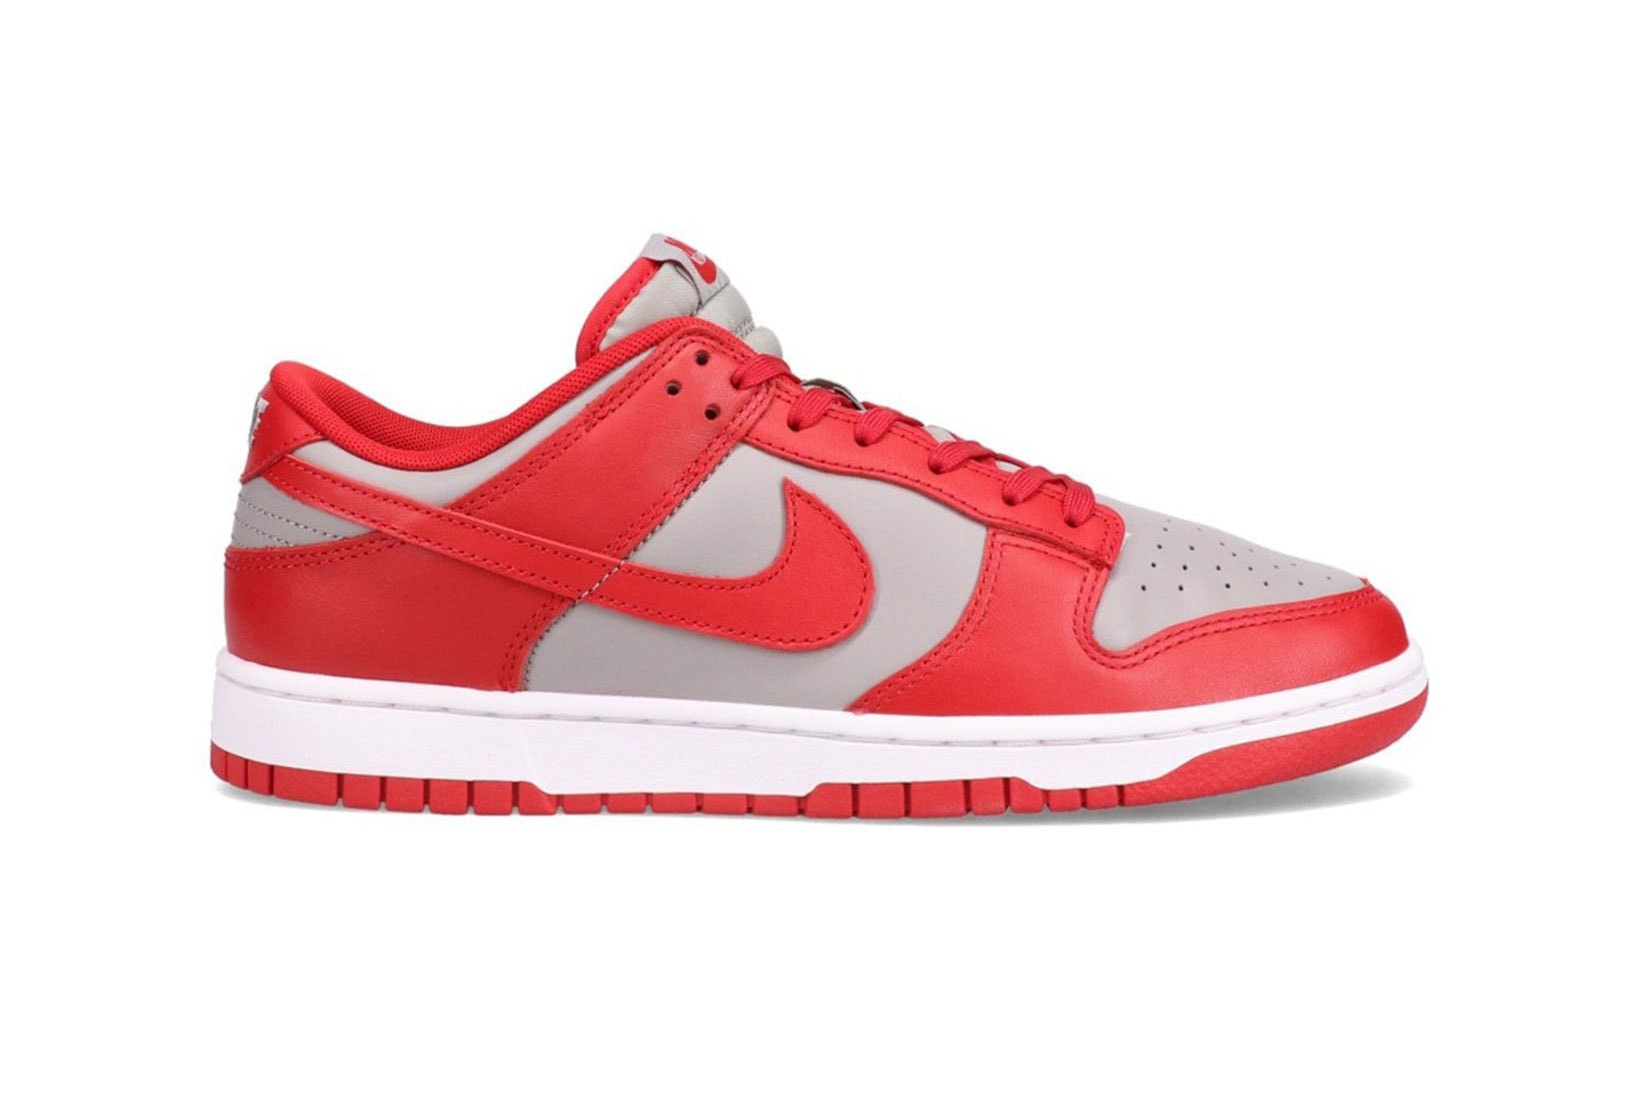 nike dunk low new colorway 2021 release unlv red light gray grey